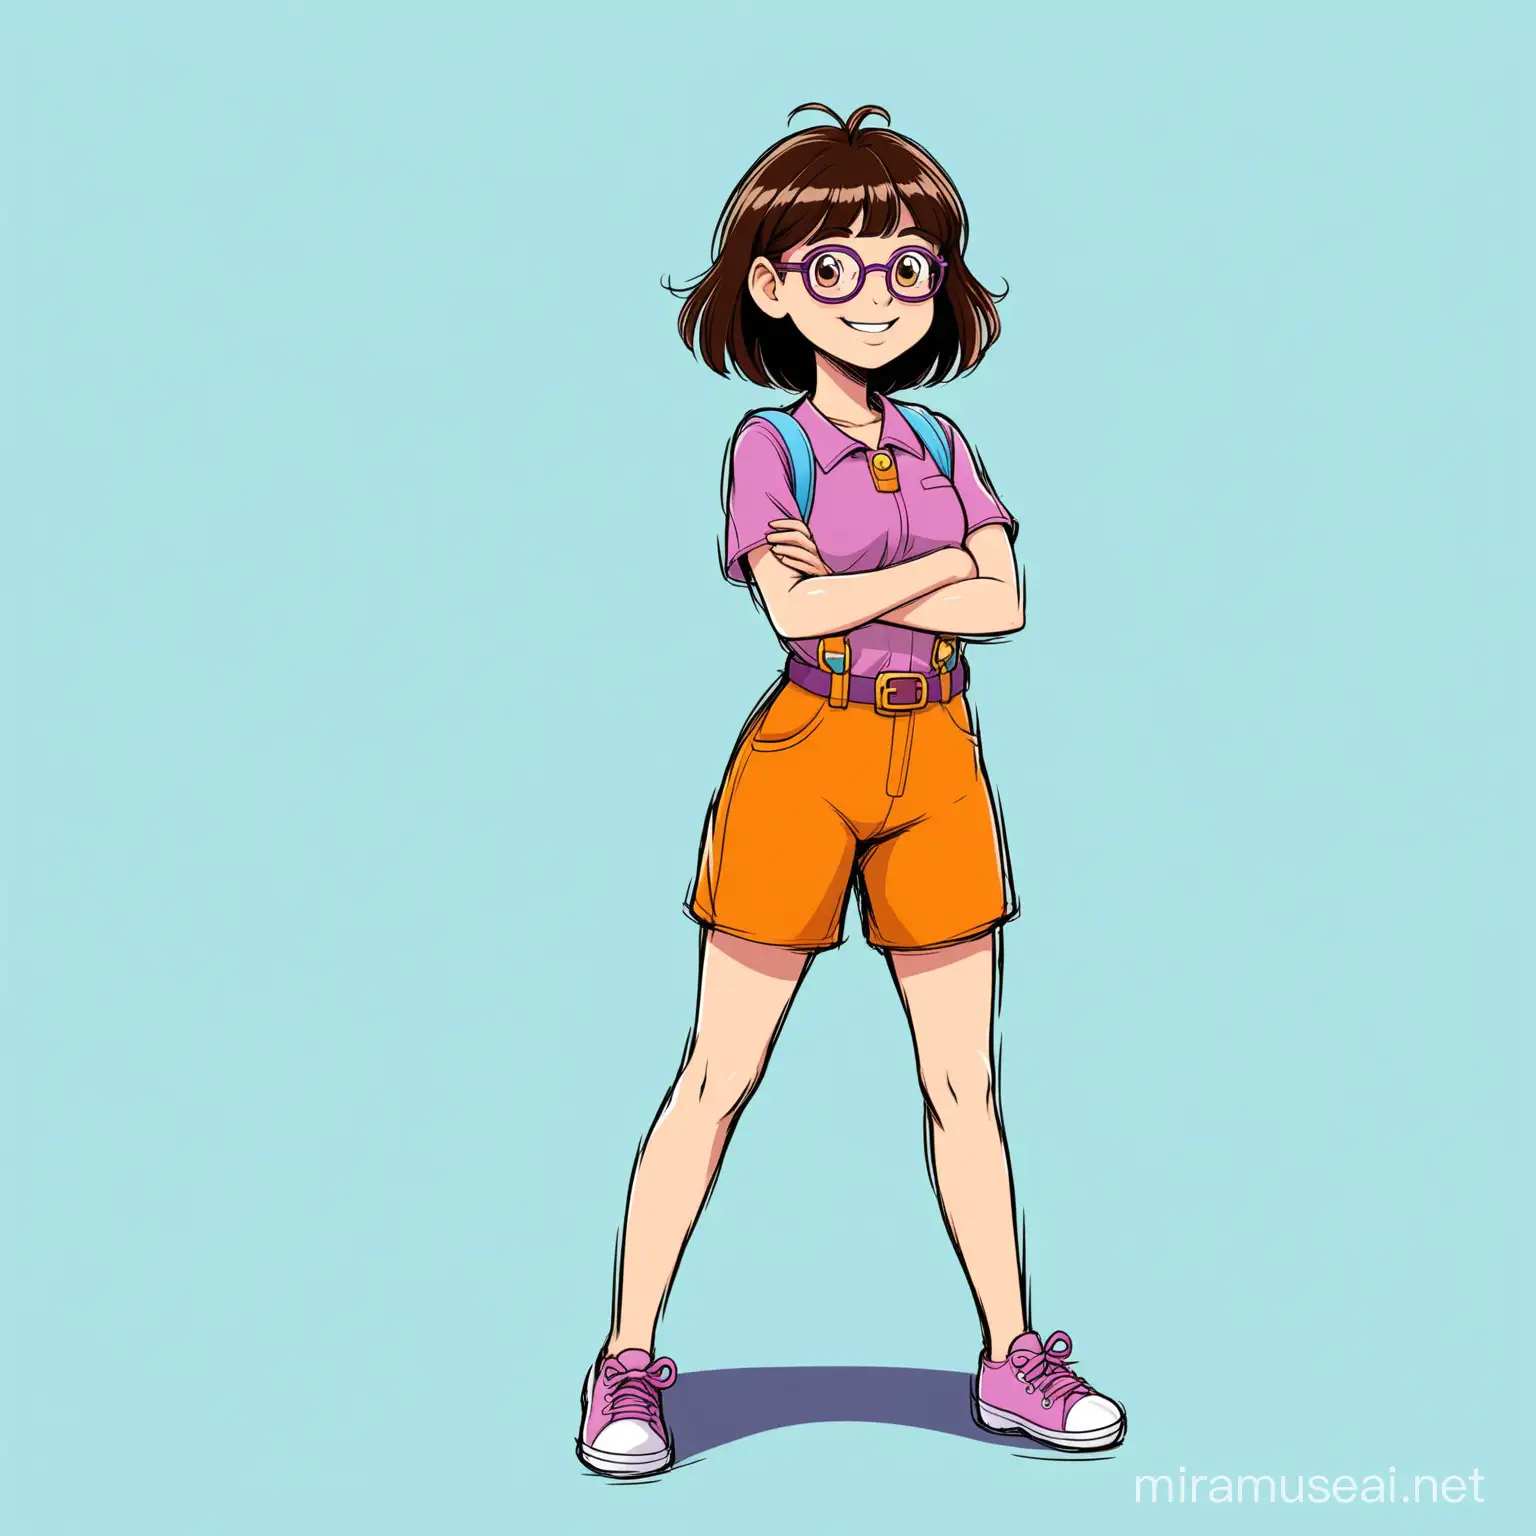 a full-body 2d drawing of a tall, slender, 18 year old white girl, wearing eyeglasses and a "Dora the Explorer" hair and costume; Facing ahead but standing on her right leg, smiling, crossed arms position, on a plain white background, drawn in Disney style